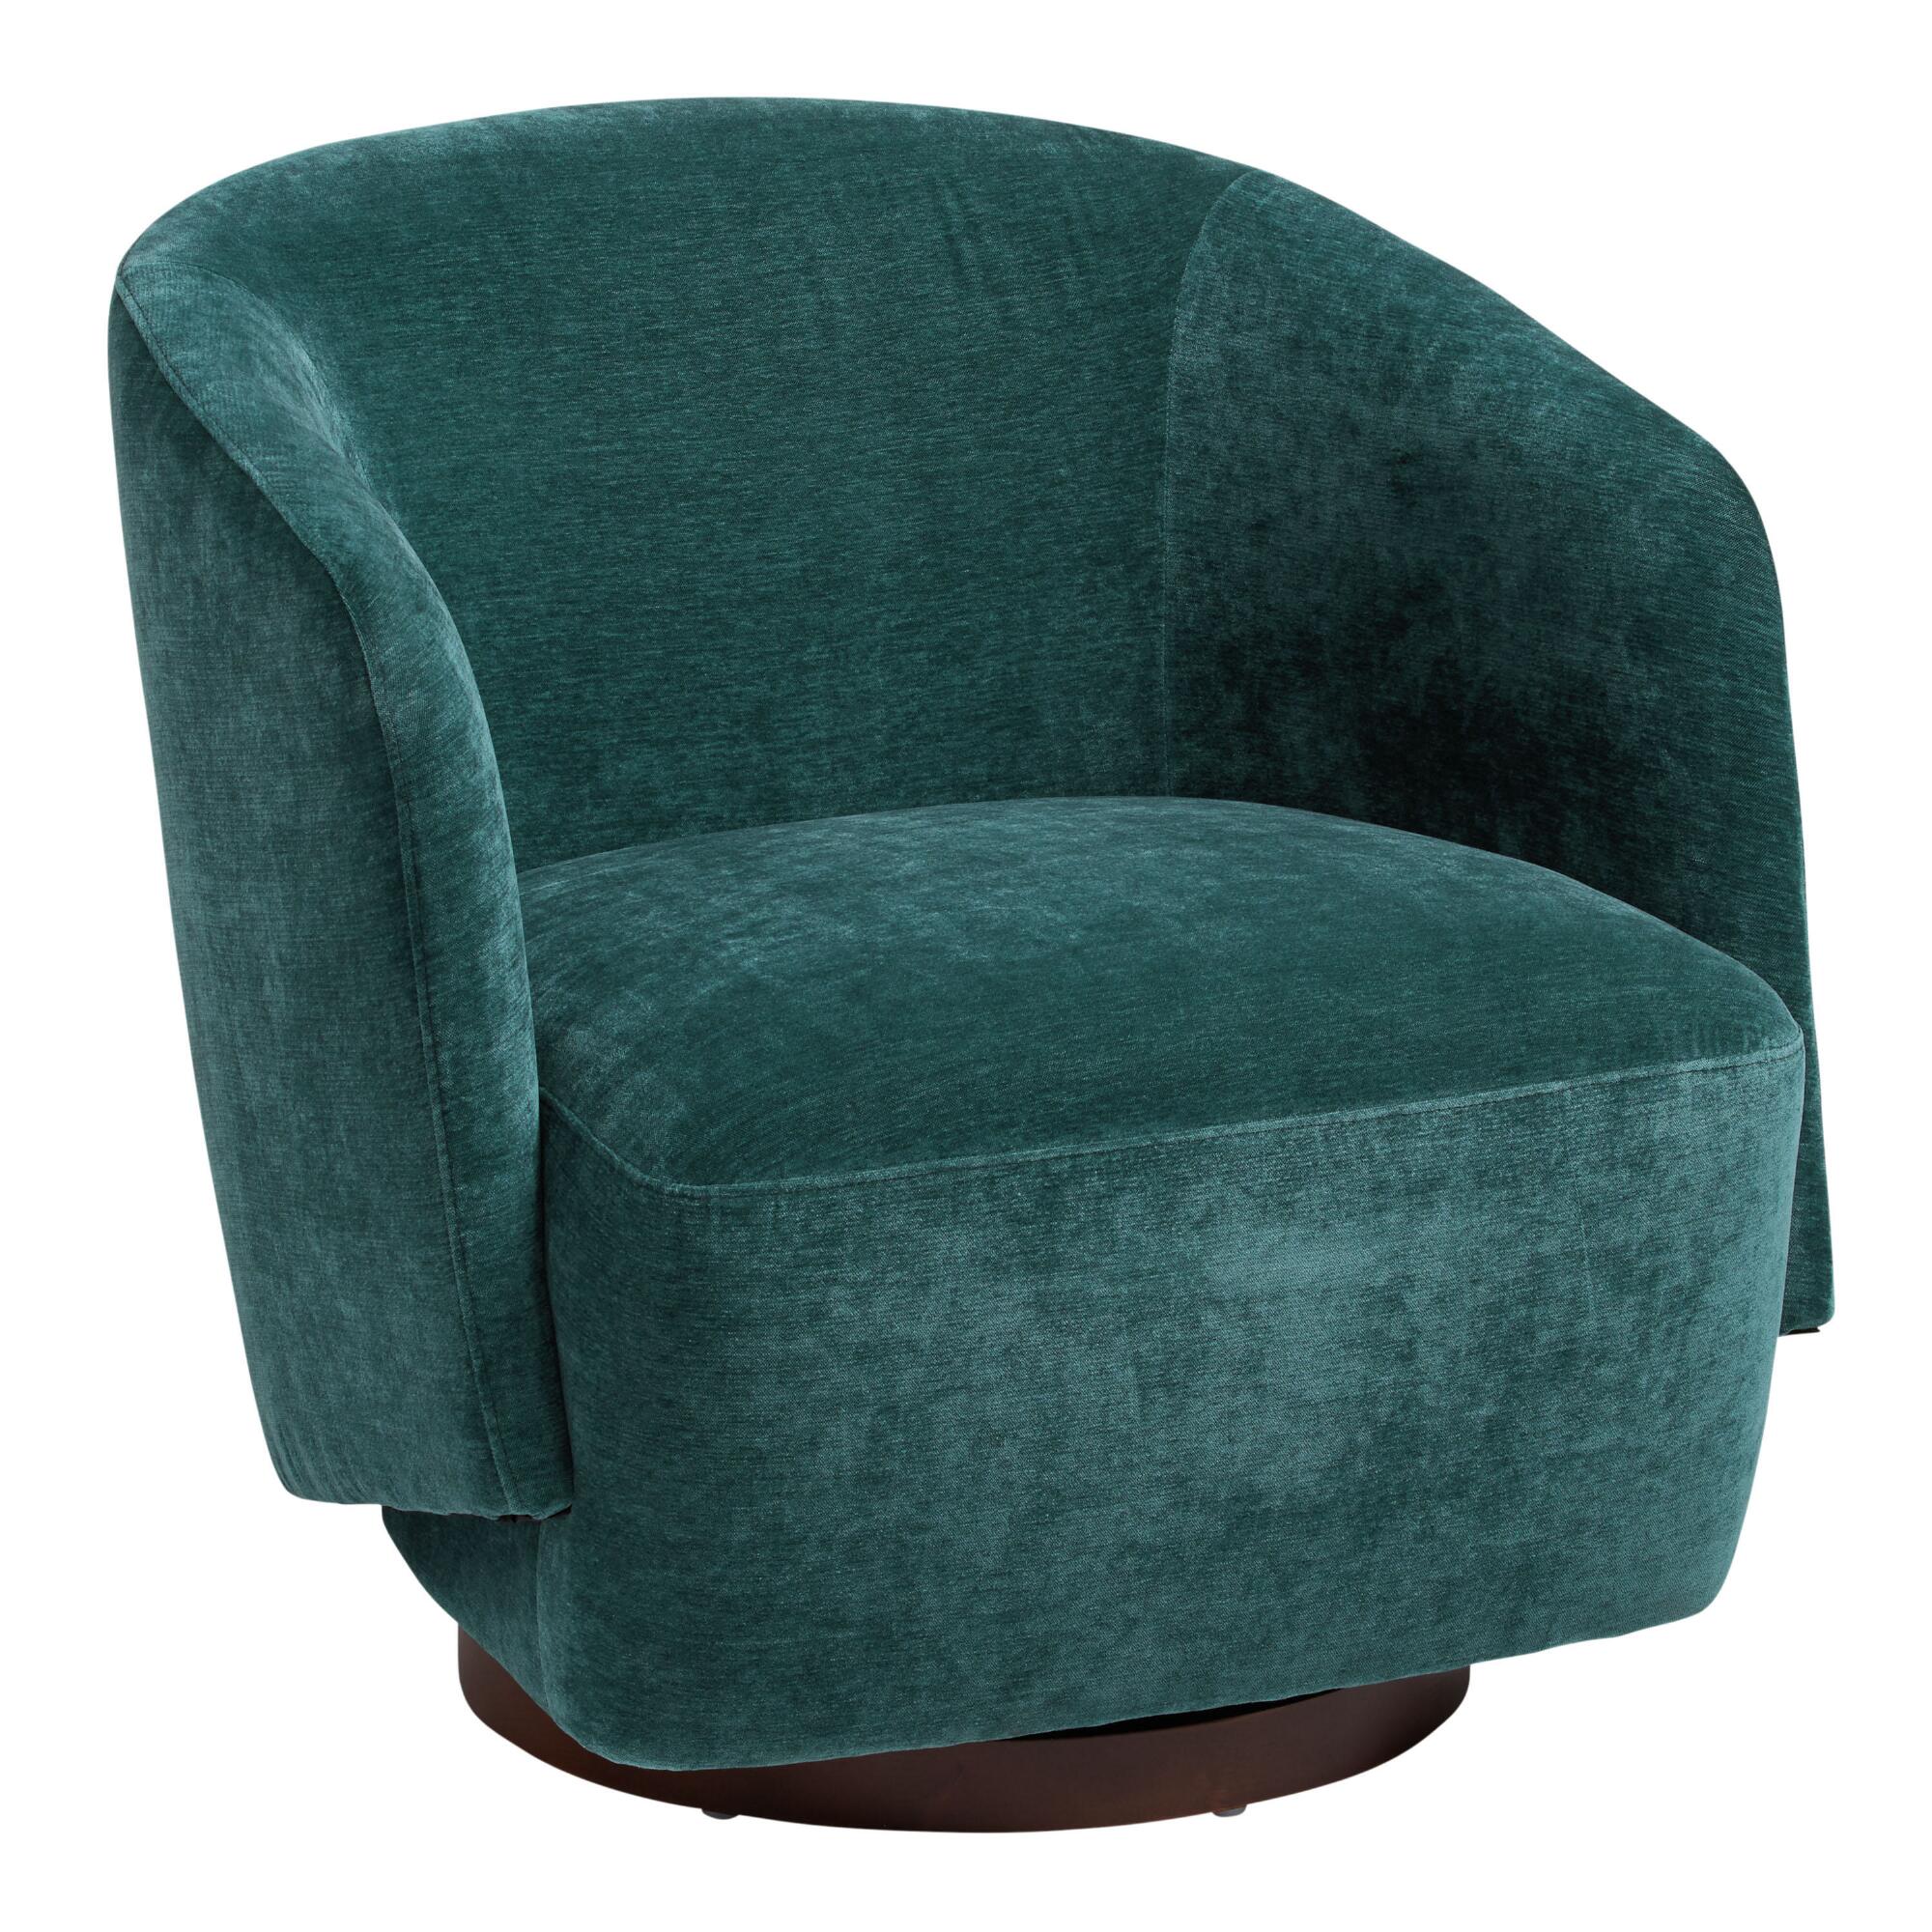 Teal Green Sophie Upholstered Swivel Chair: Blue - Polyester by World Market